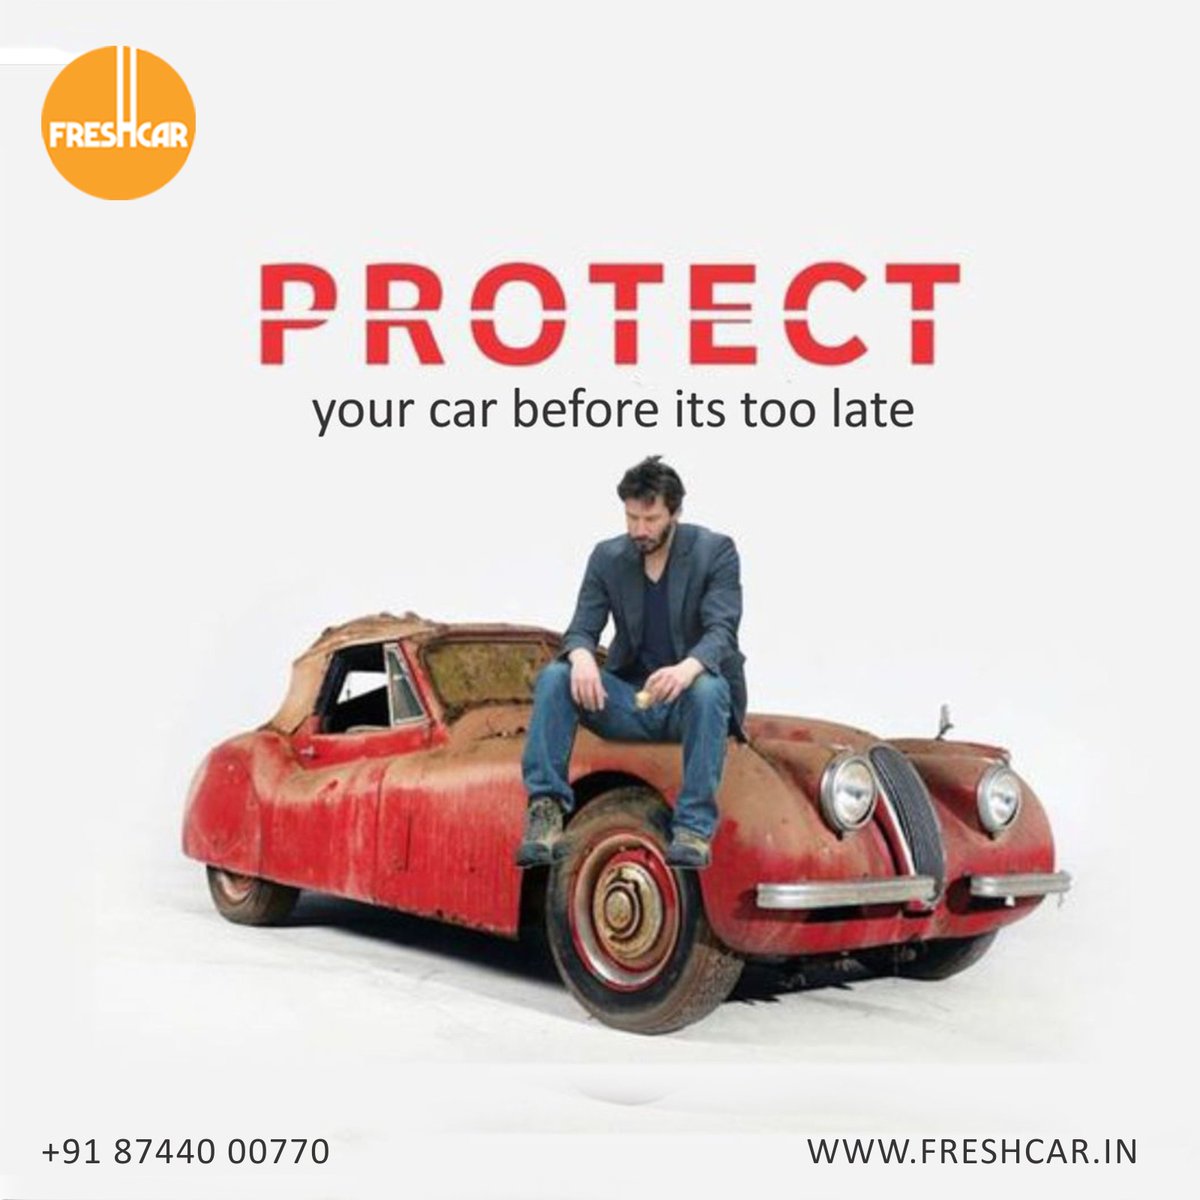 Daily cleaning and regular maintenance helps in improving the durability of your car. Freshcar provides daily Premium Car Cleaning Services at your doorstep!!

Book a demo: freshcar.in

#Freshcar #carcleaning #spotlessride #cleancar #urbanliving #carcare #gurgaon